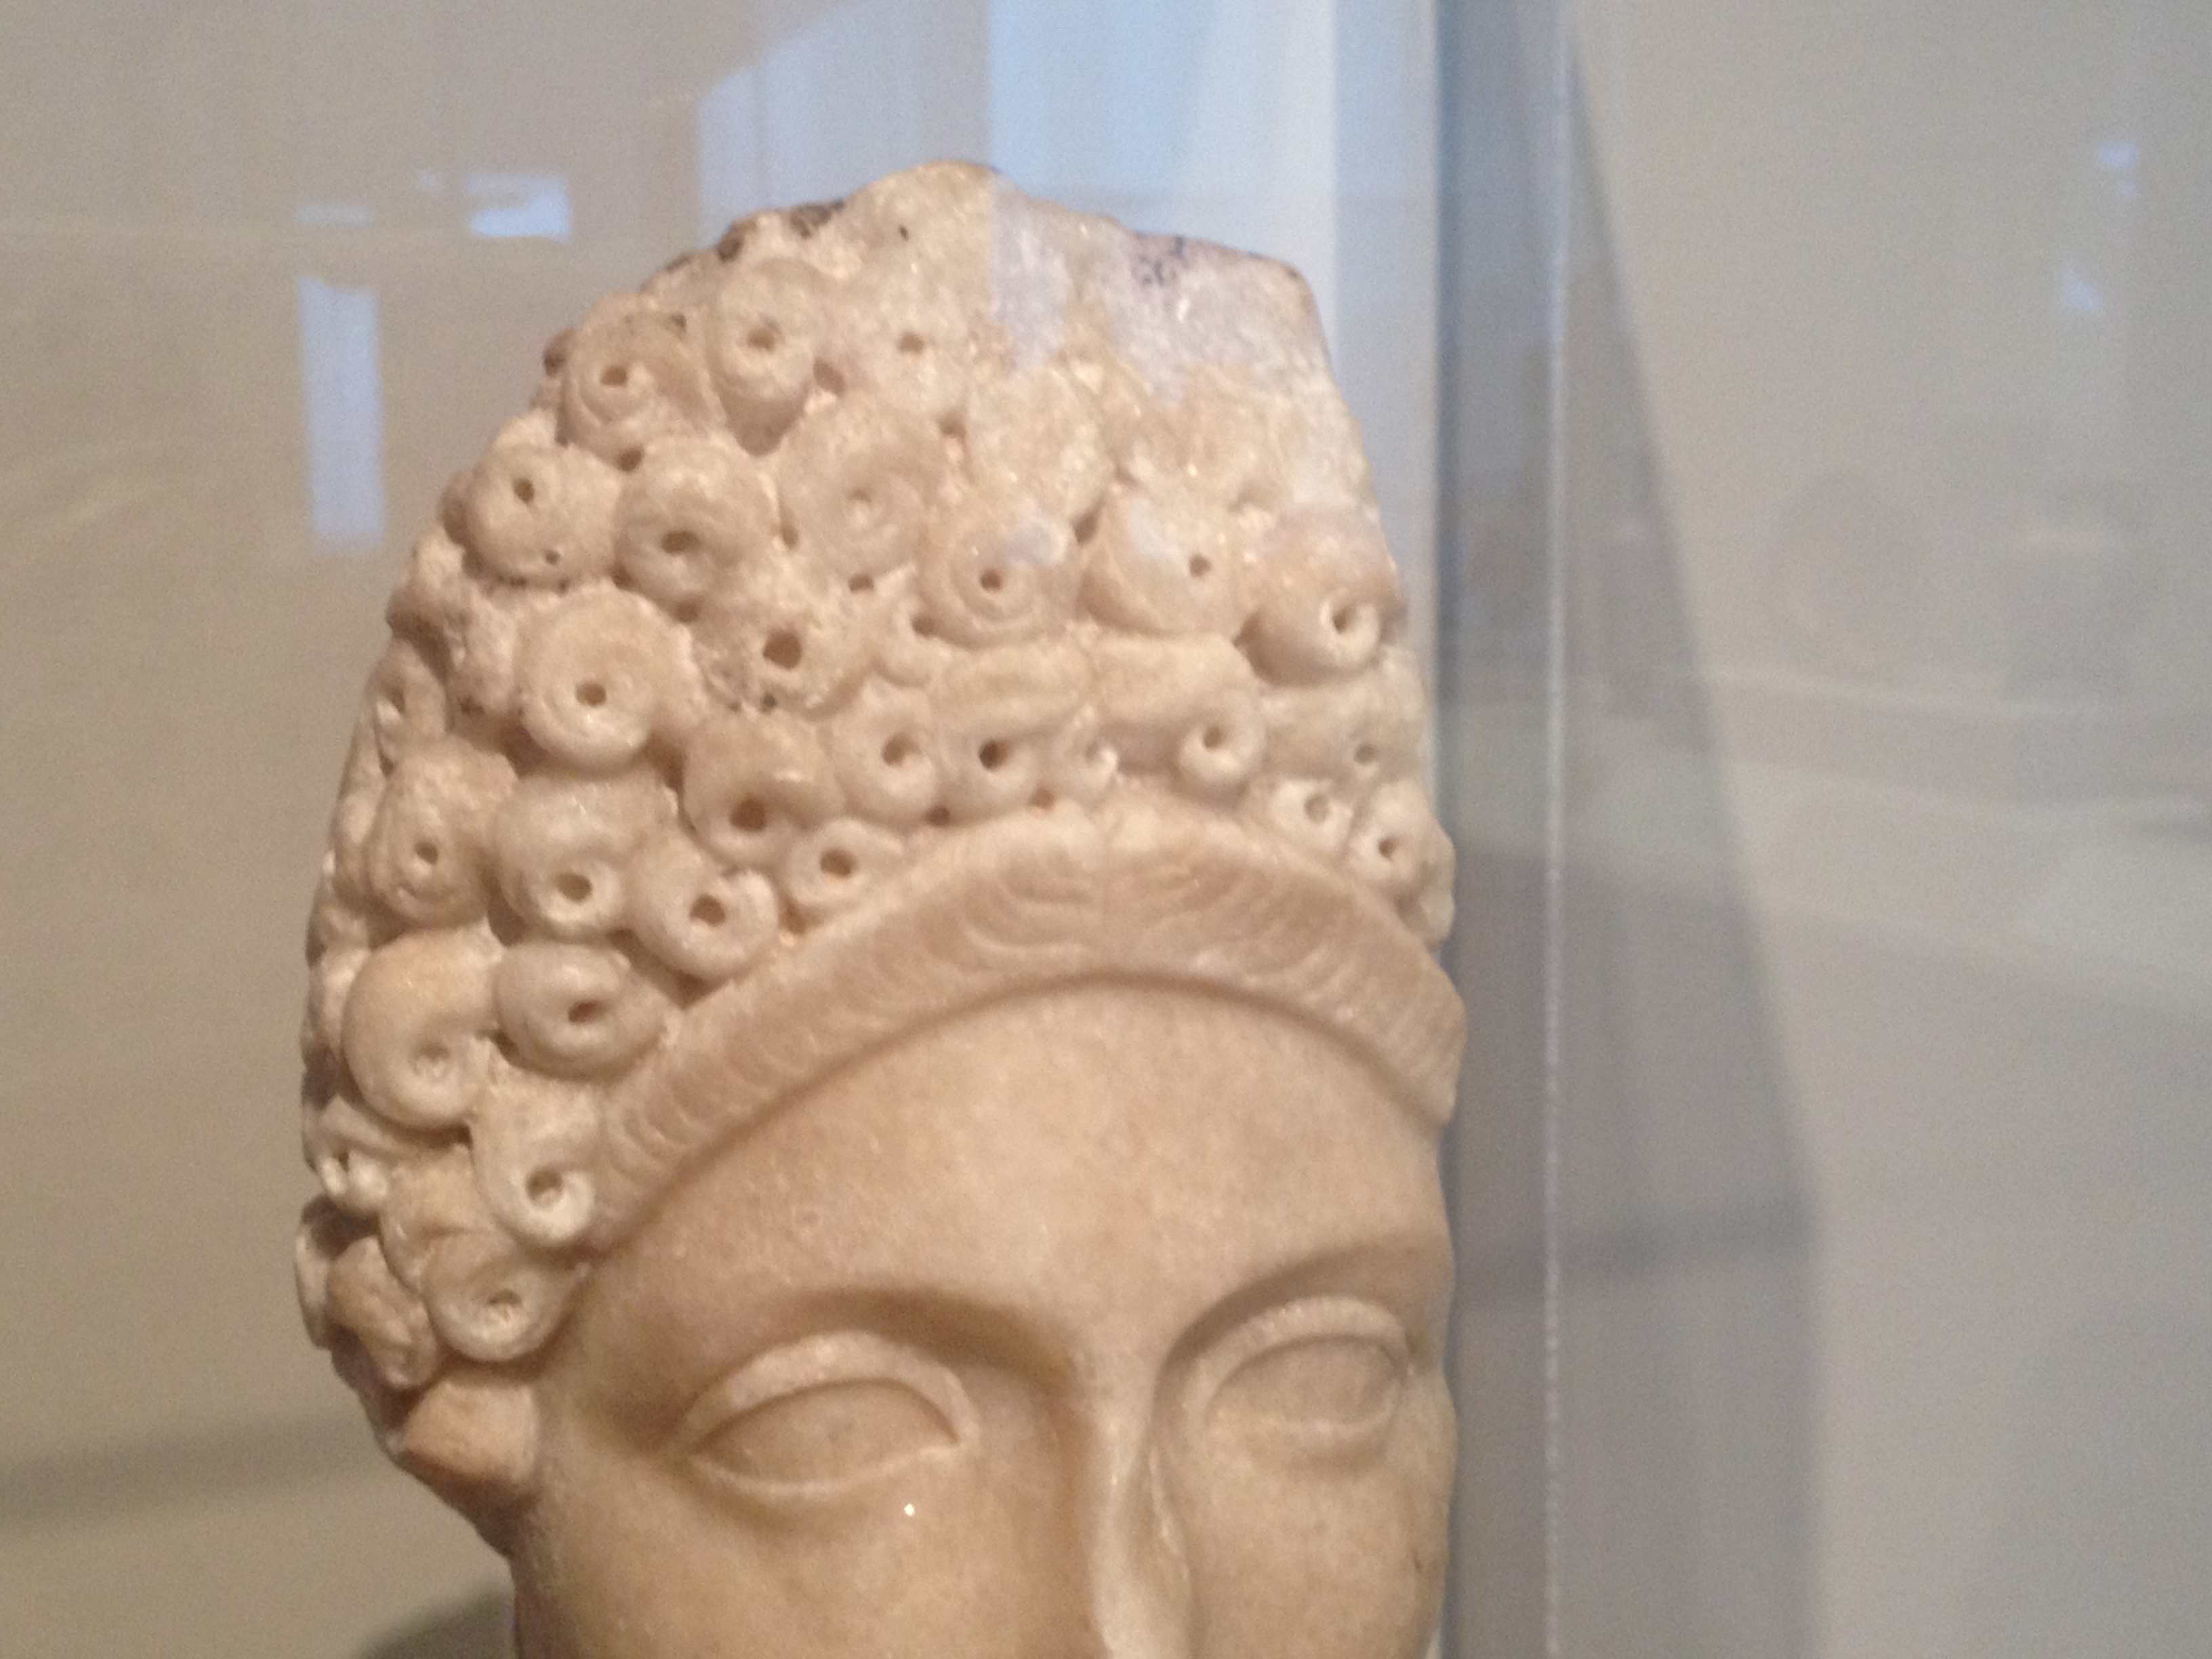 Roman [Flavian Period], Head of a Noble Woman, 96–100 AD. Pentelic Marble. Milwaukee Art Museum, purchase, with funds from the Woman's Exchange. Photo credit Chelsea Kelly.